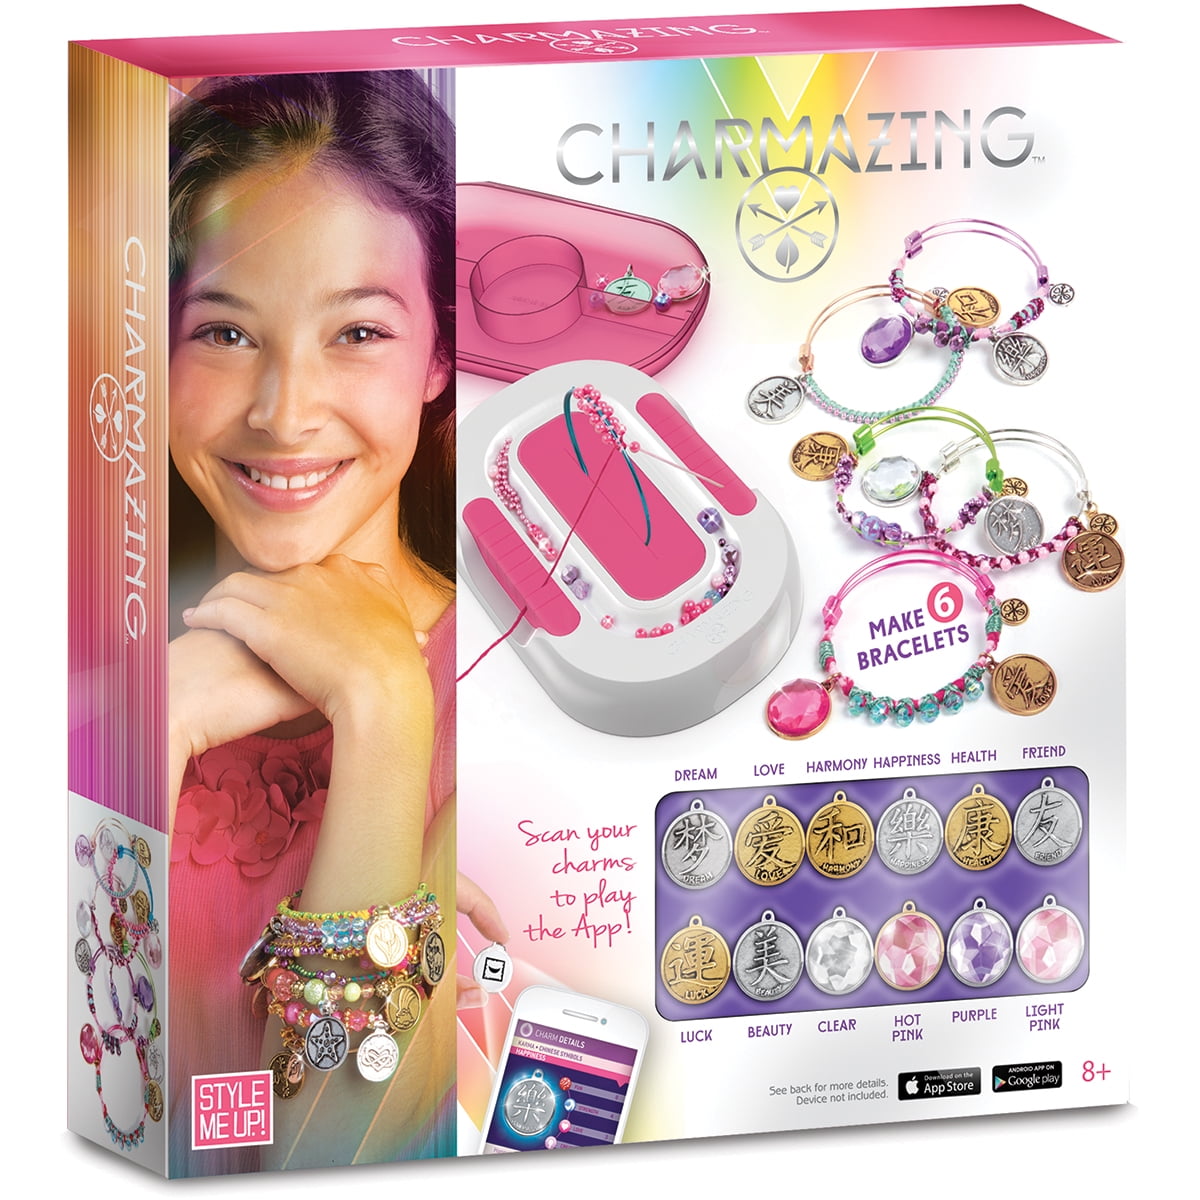 Charmazing Deluxe Kit Karma Style Me Up Brand New Arts and Crafts RRP £19.99 